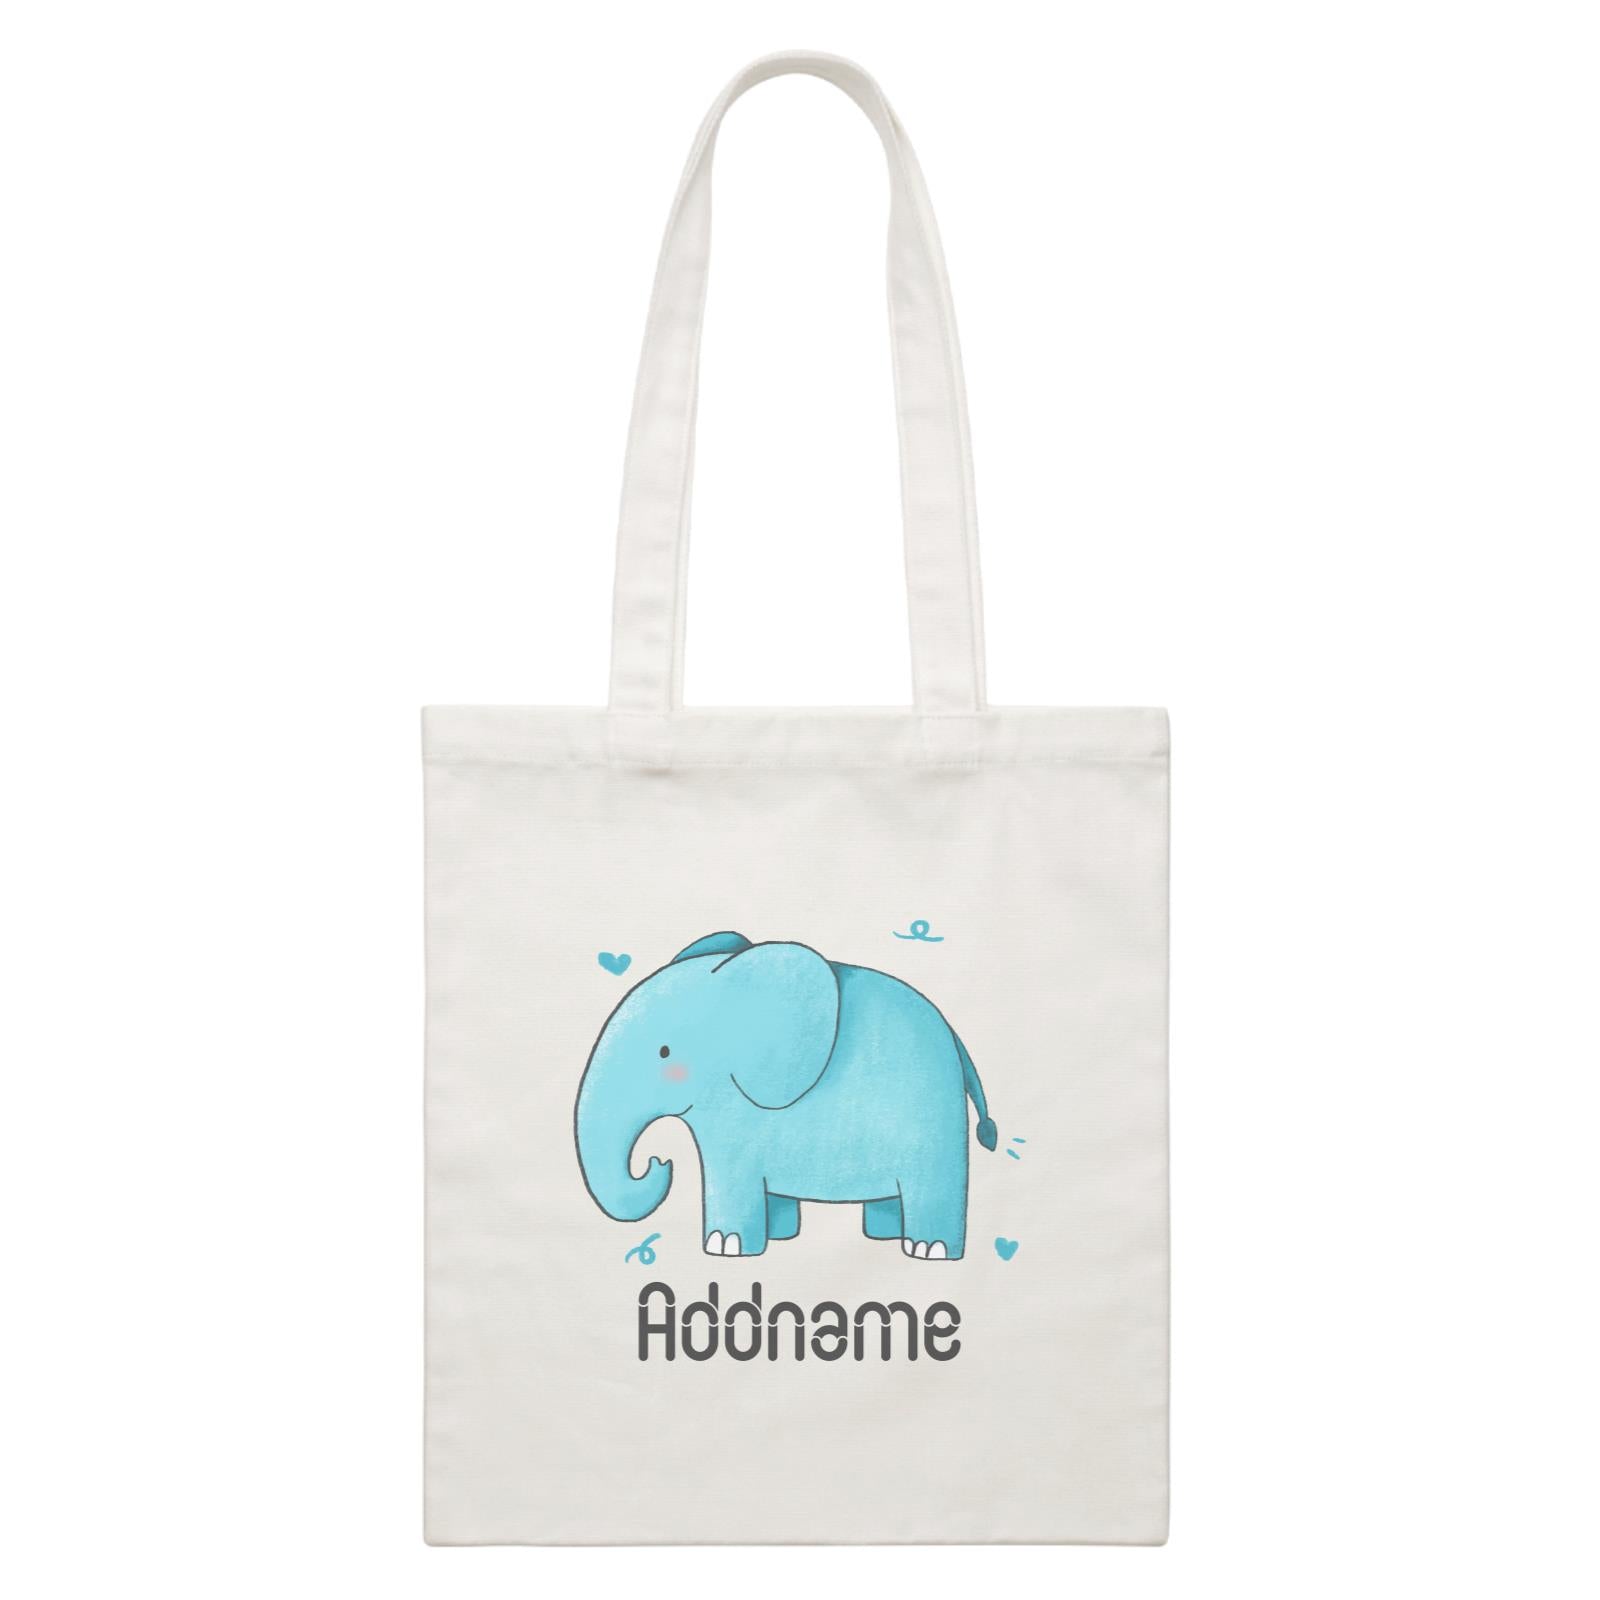 Cute Hand Drawn Style Elephant Addname White Canvas Bag